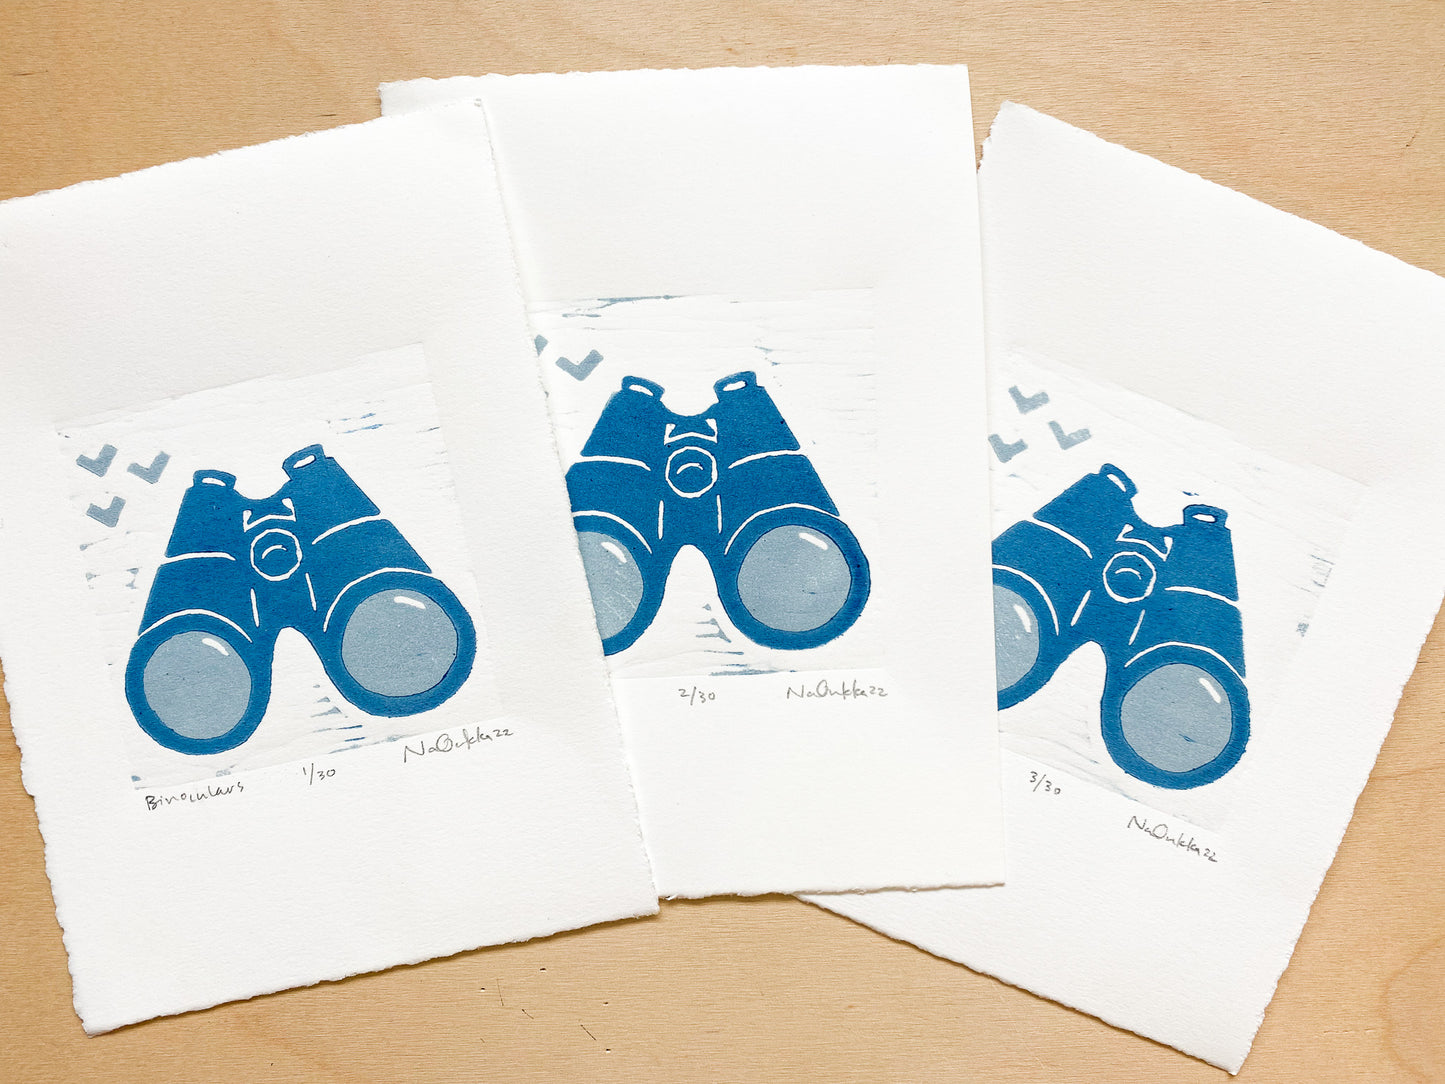 An edition of woodcut prints by Nan Onkka Prints. The prints depict a pair of binoculars printed in two colors - light gray and dark blue. The image is minimalist in style with a hand-carved aesthetic. Made in Grand Marais, Minnesota.